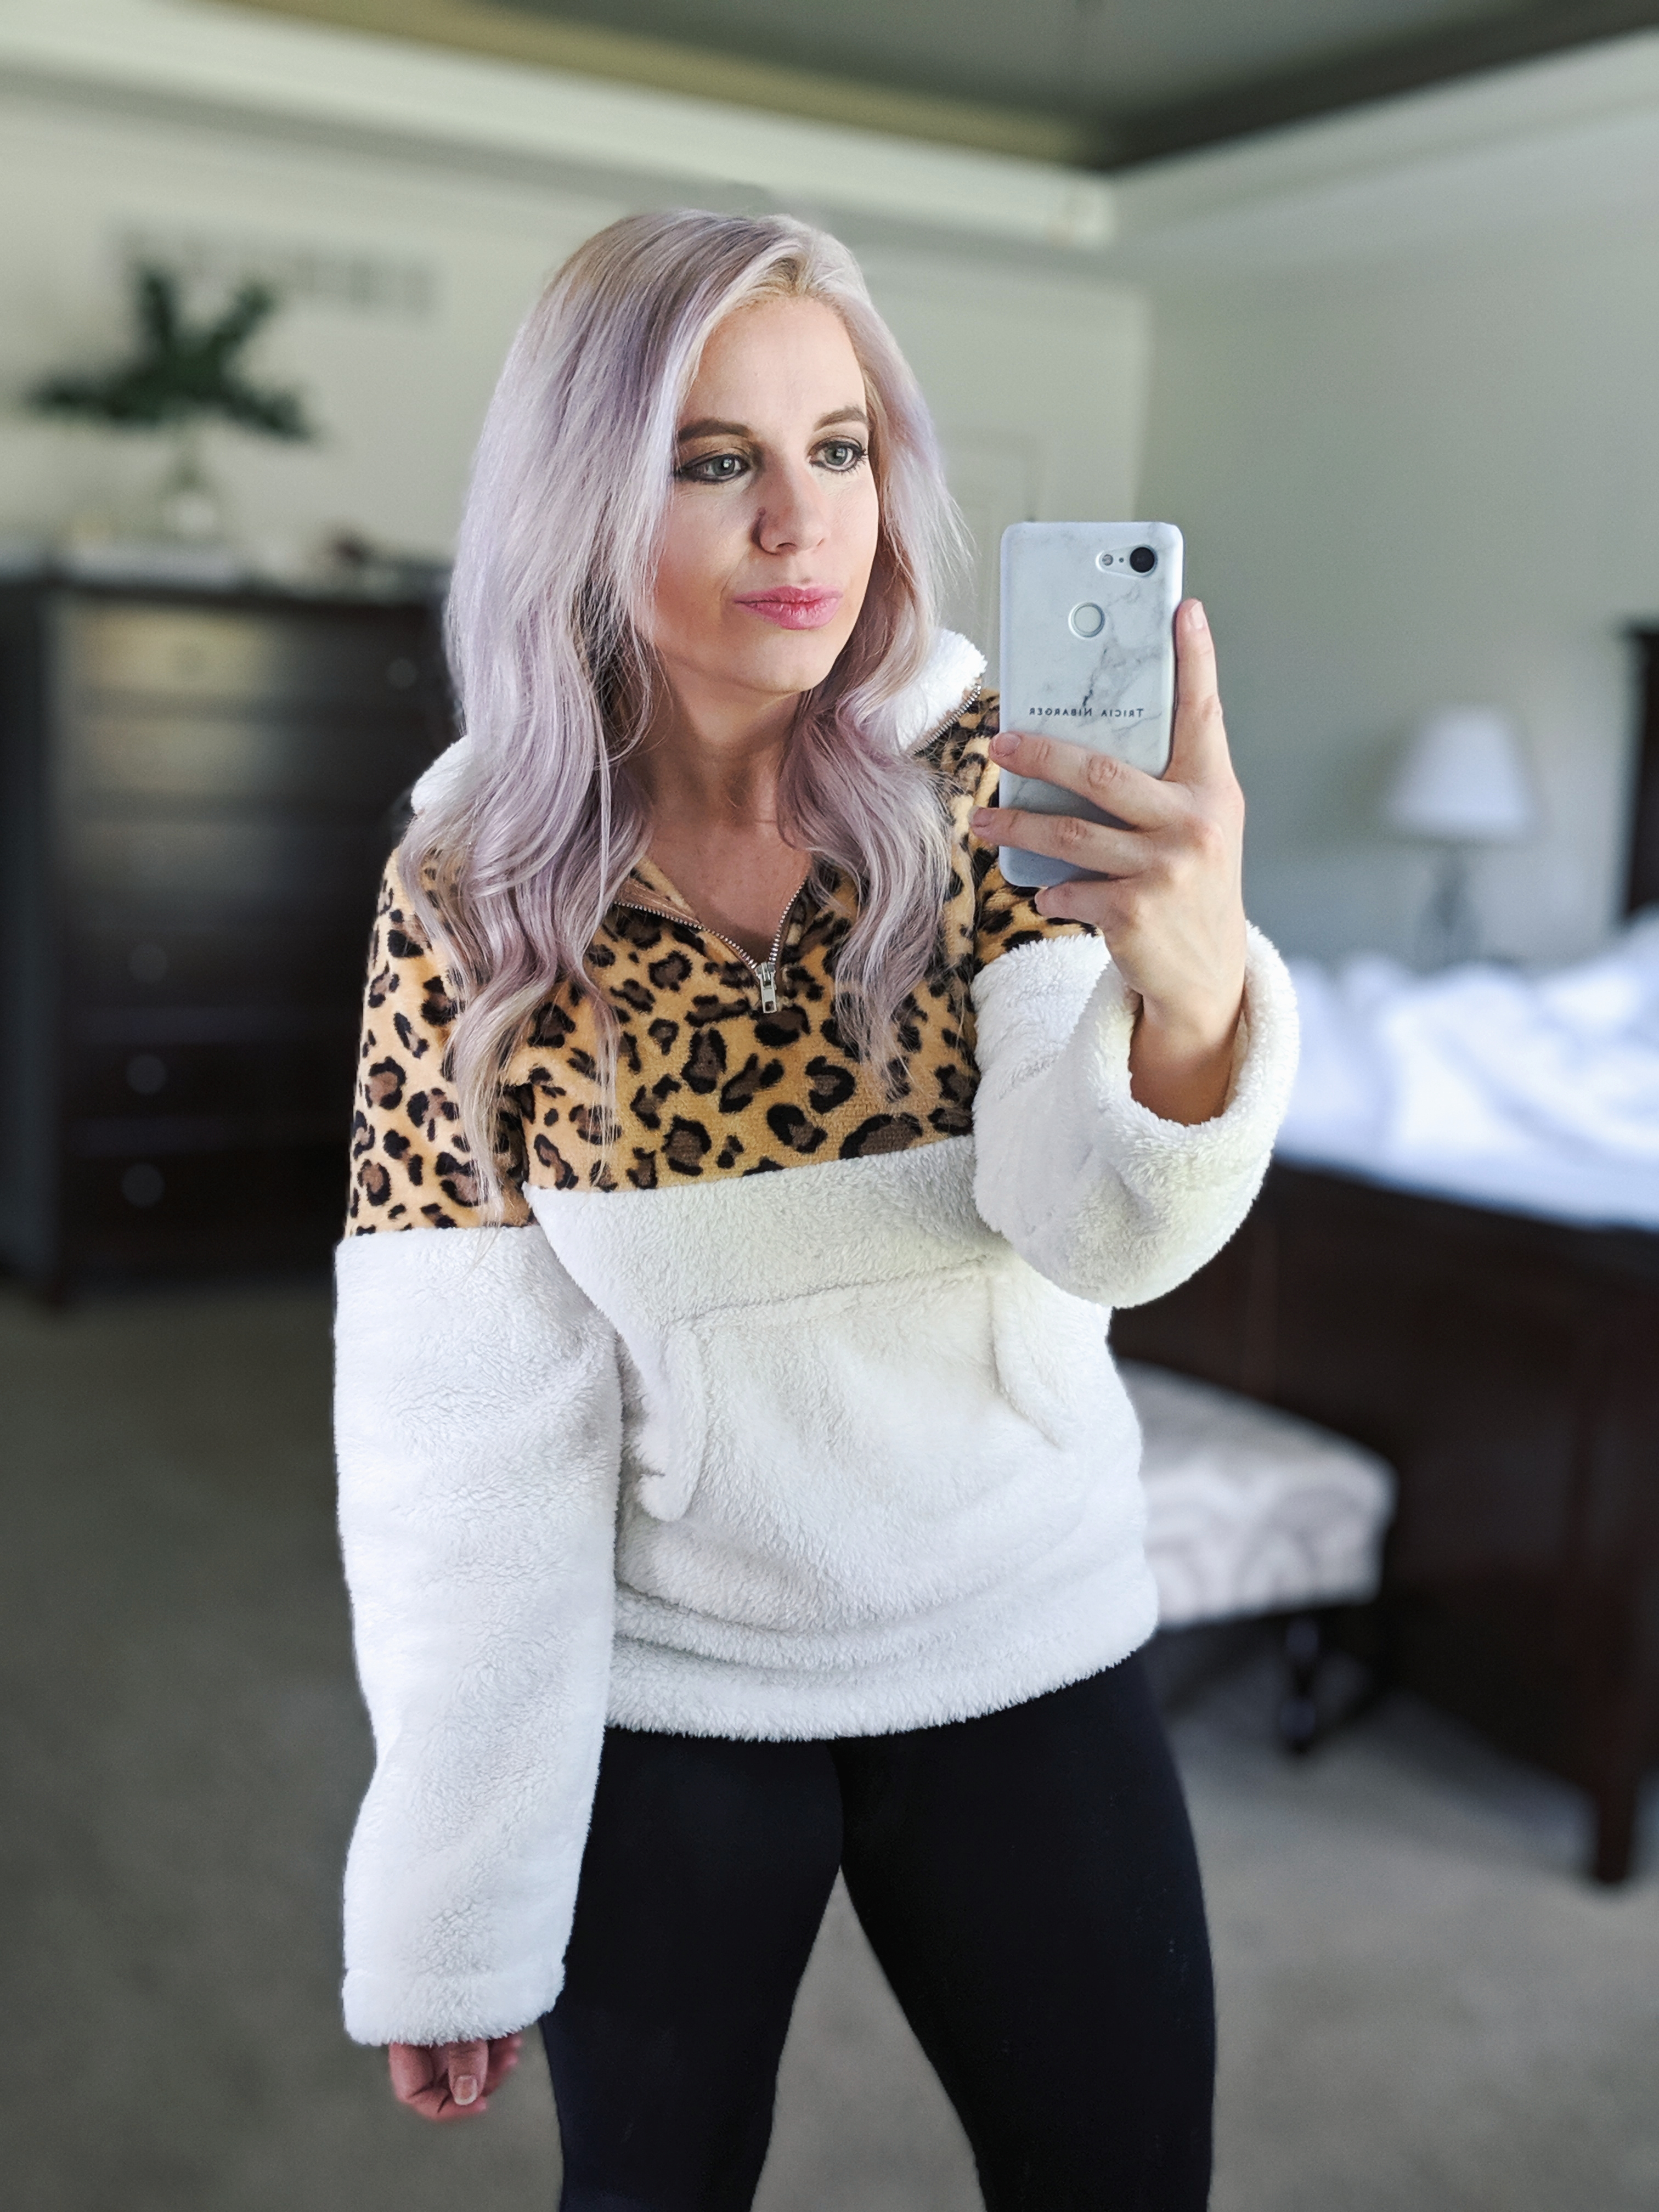 HOW TO SHOP AT SHEIN AND TRY ON HAUL